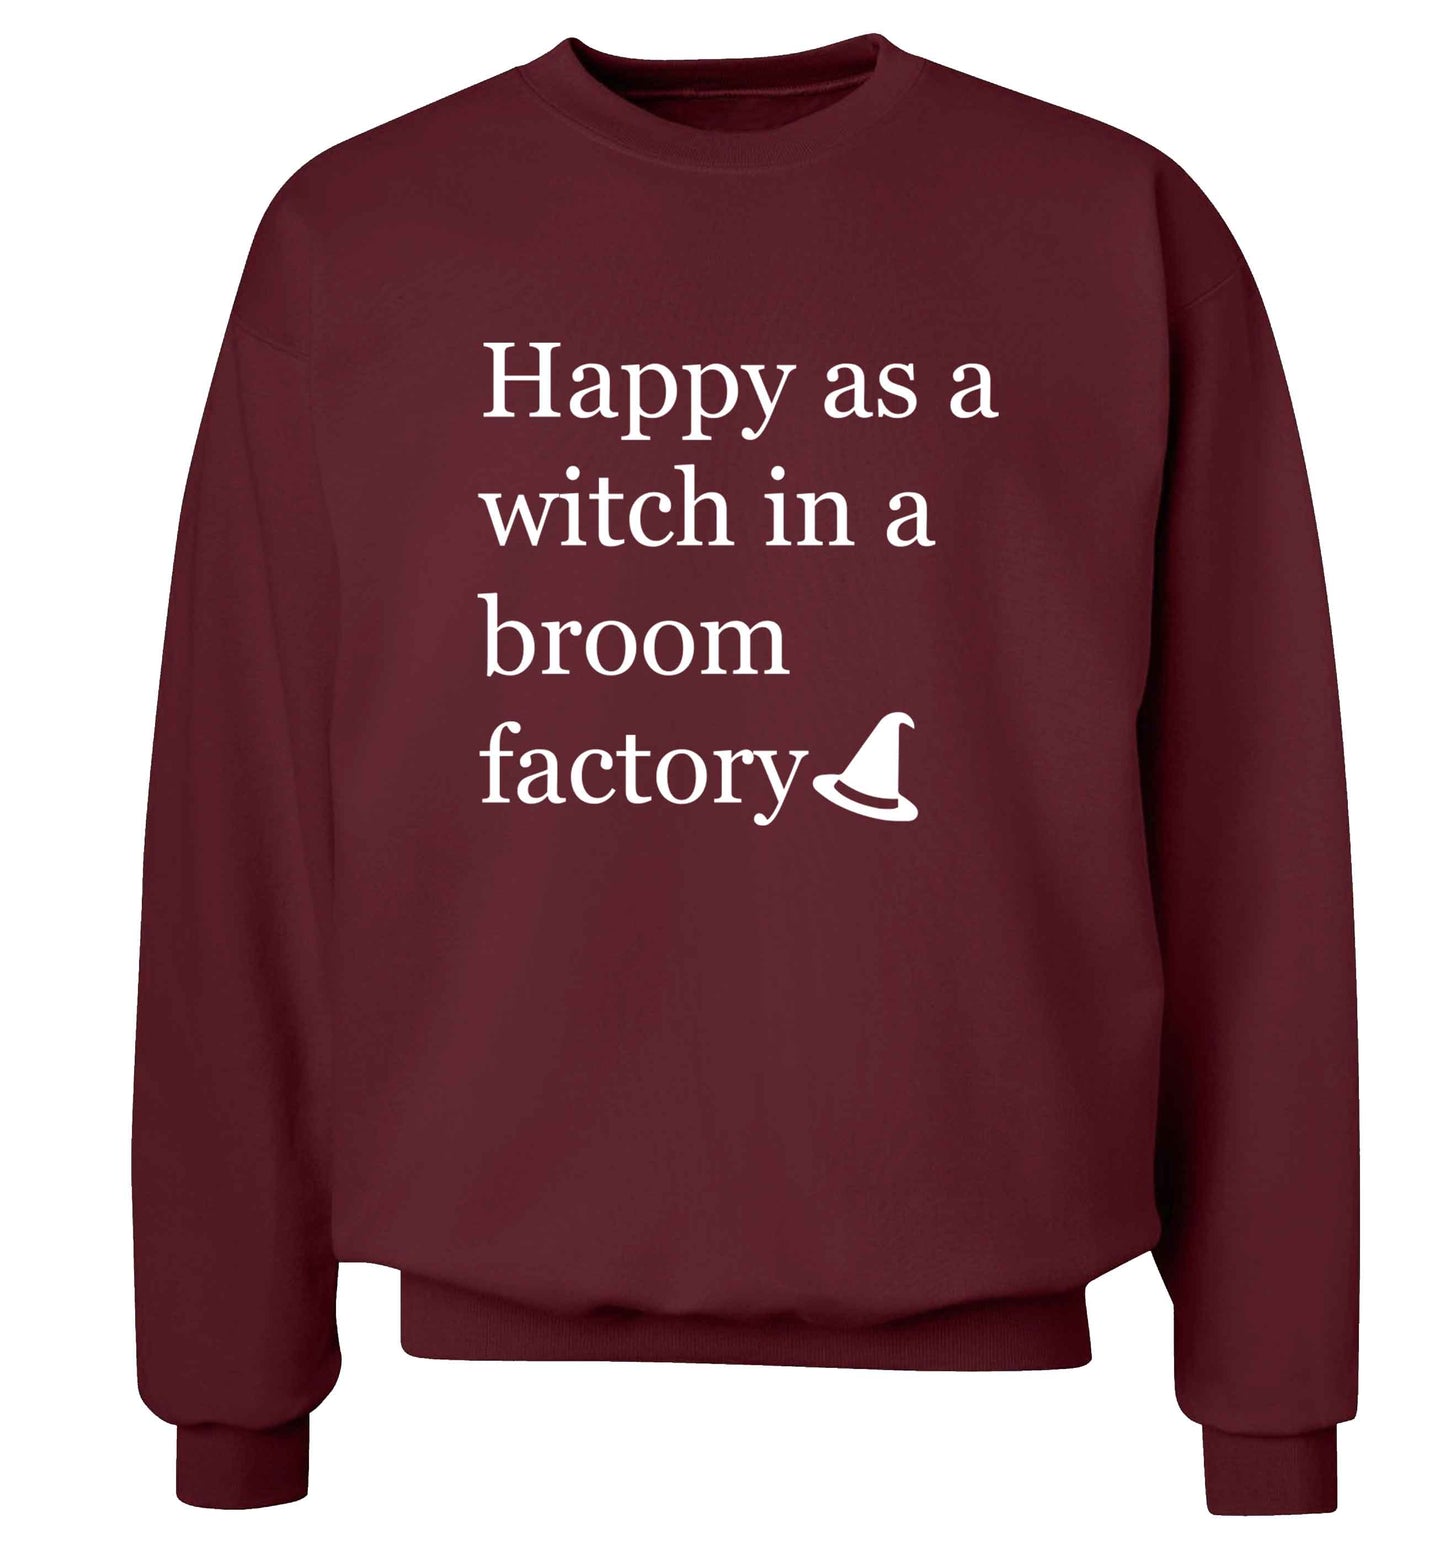 Happy as a witch in a broom factory adult's unisex maroon sweater 2XL